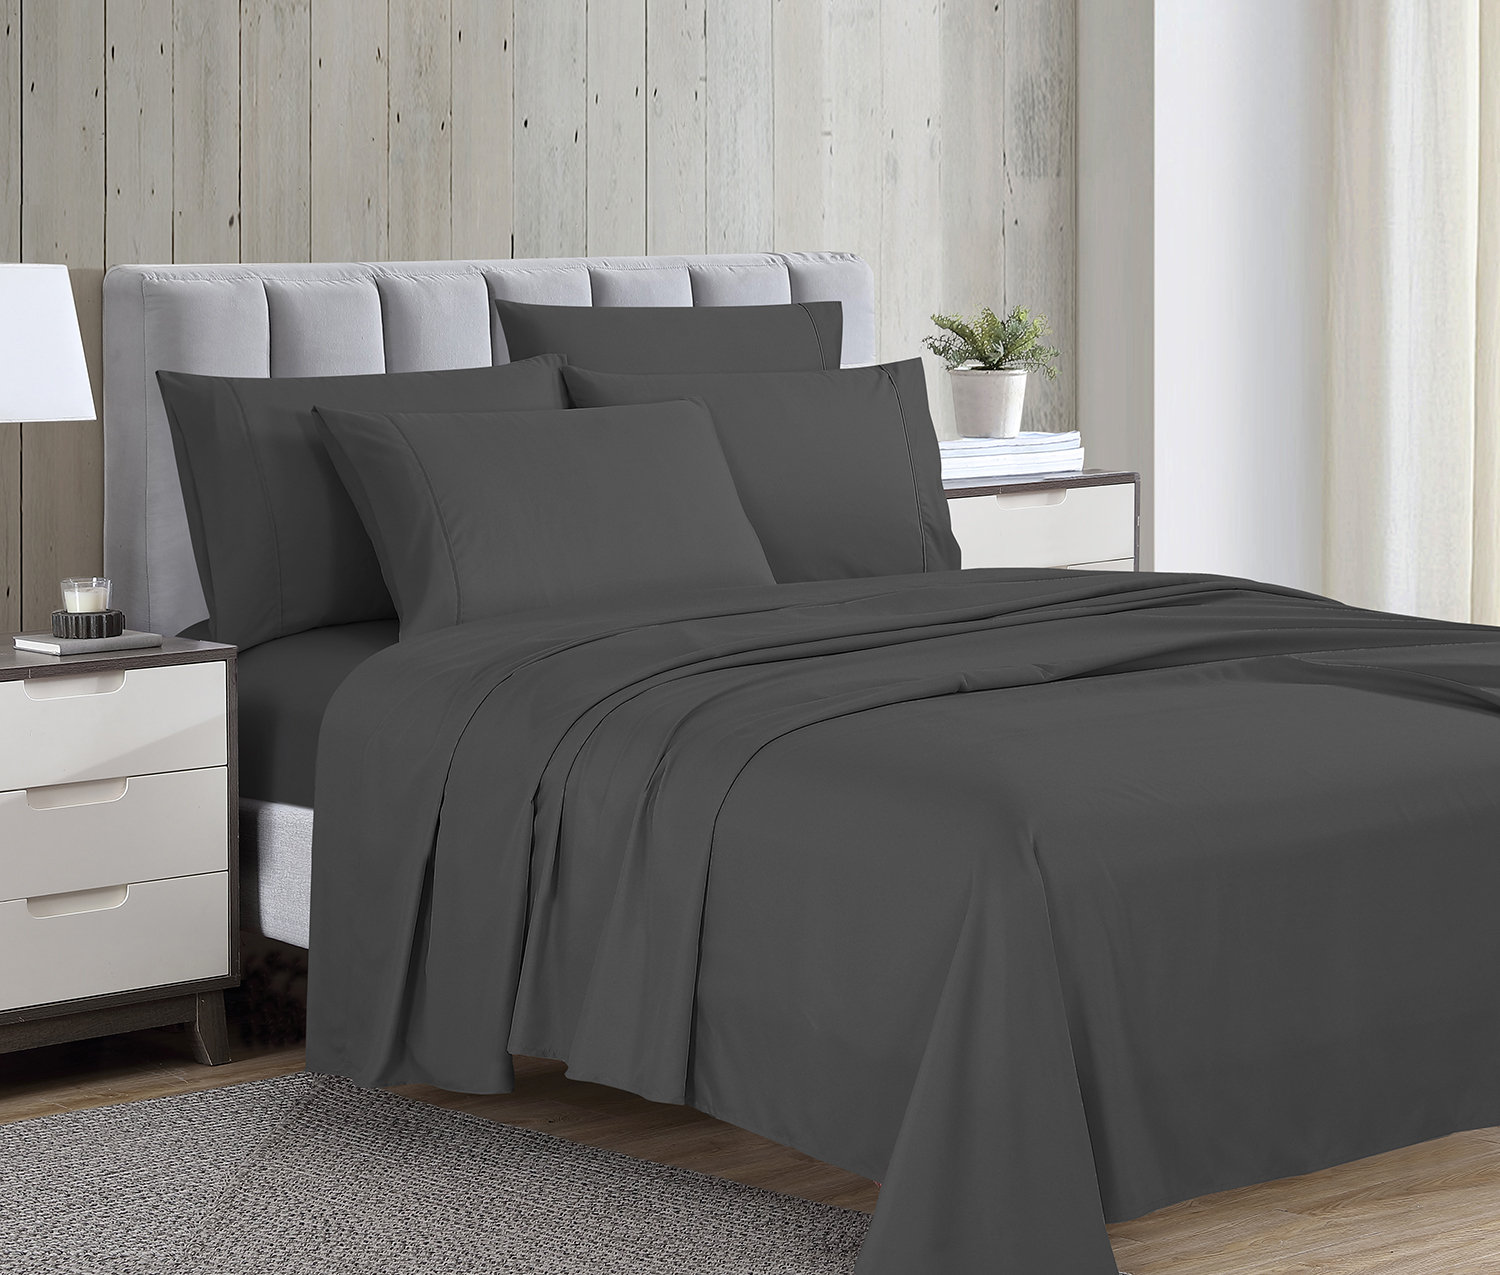 Bare Home 2 Twin XL Fitted Bed Sheets - Ultra-Soft, Hypoallergenic (Twin XL  - 2 Pack, Light Grey) 